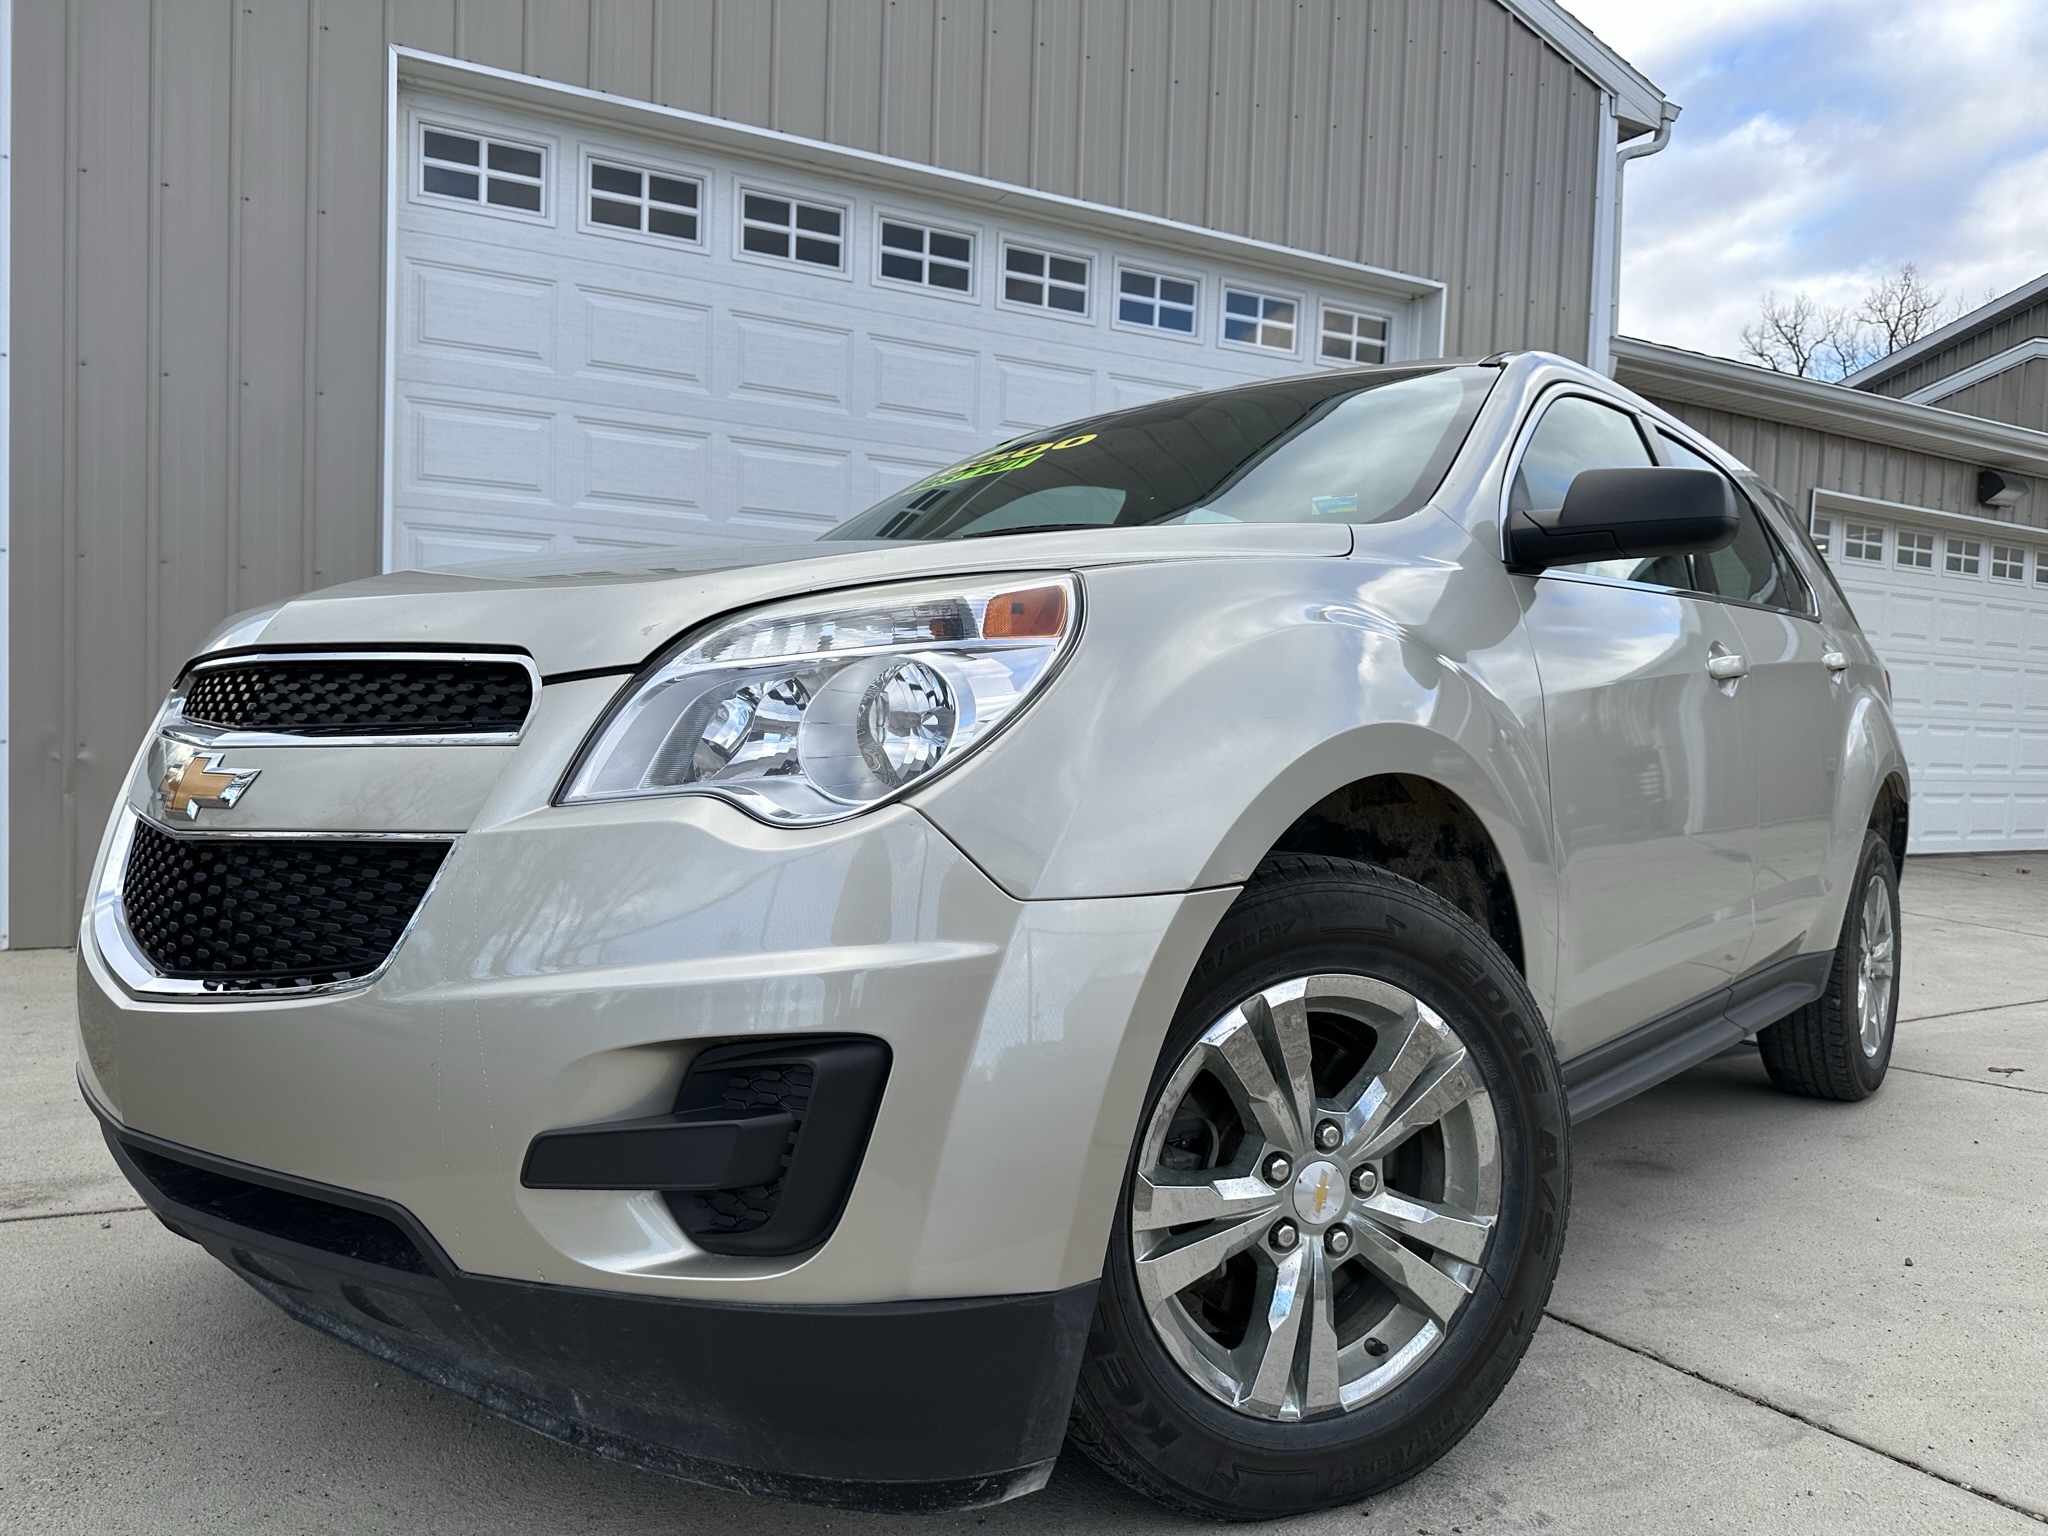 2011 Chevy Equinox For Sale